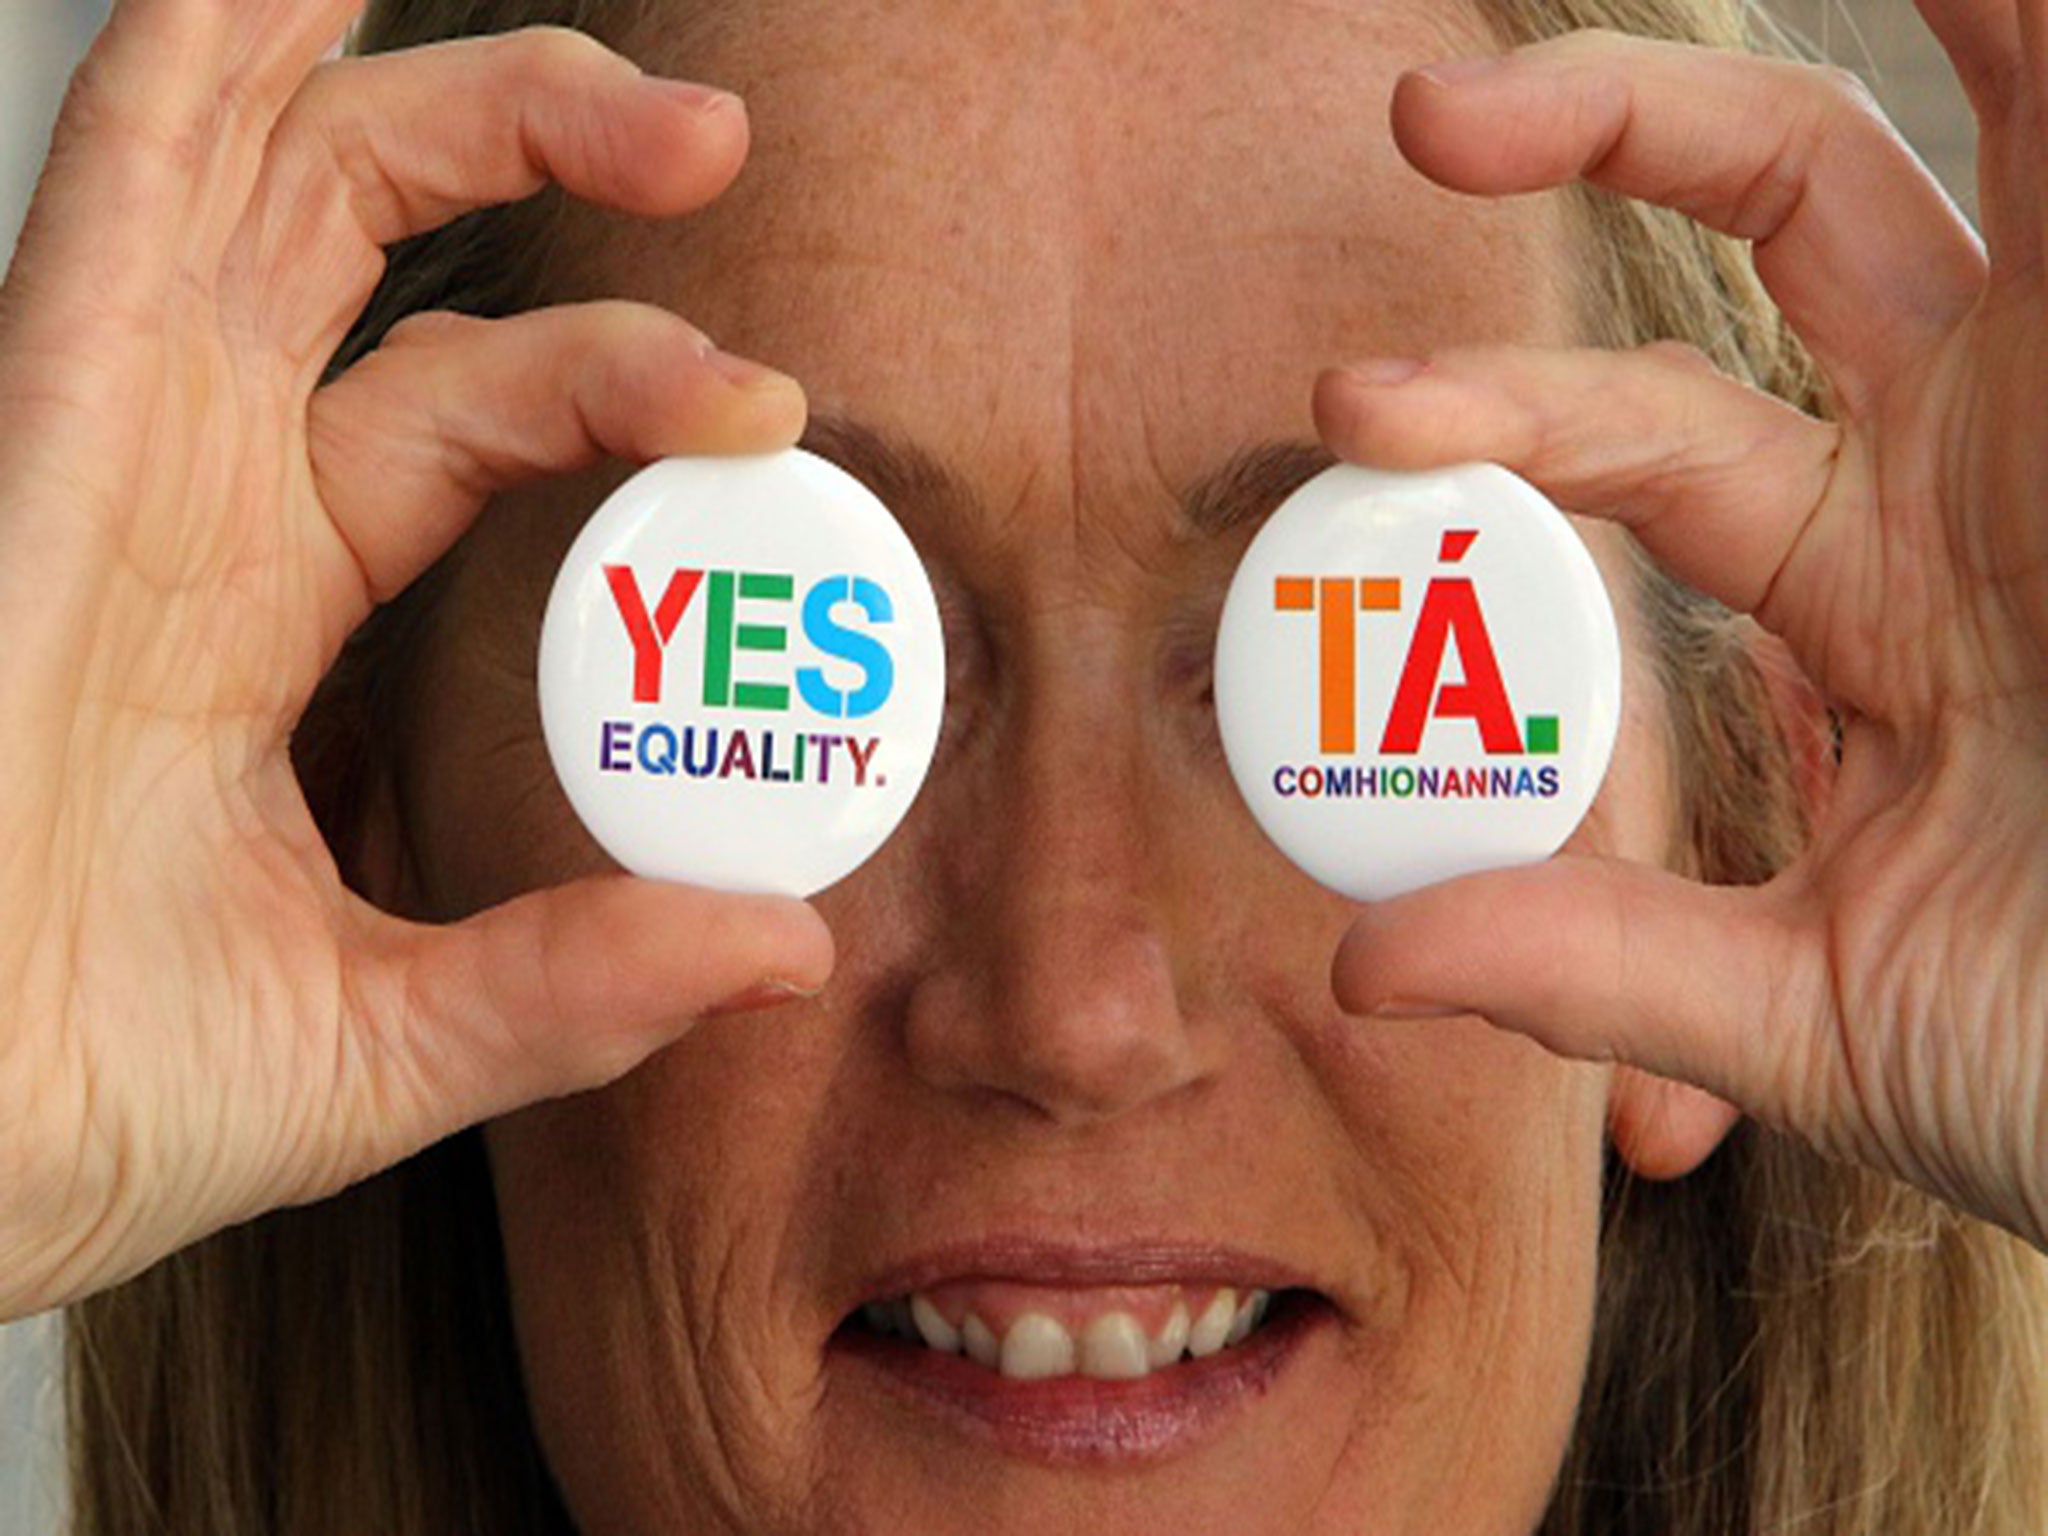 Pro-same-sex marriage campaigner Glenna Benson poses with yes badges at an event ahead of the Irish same-sex marriage referendum